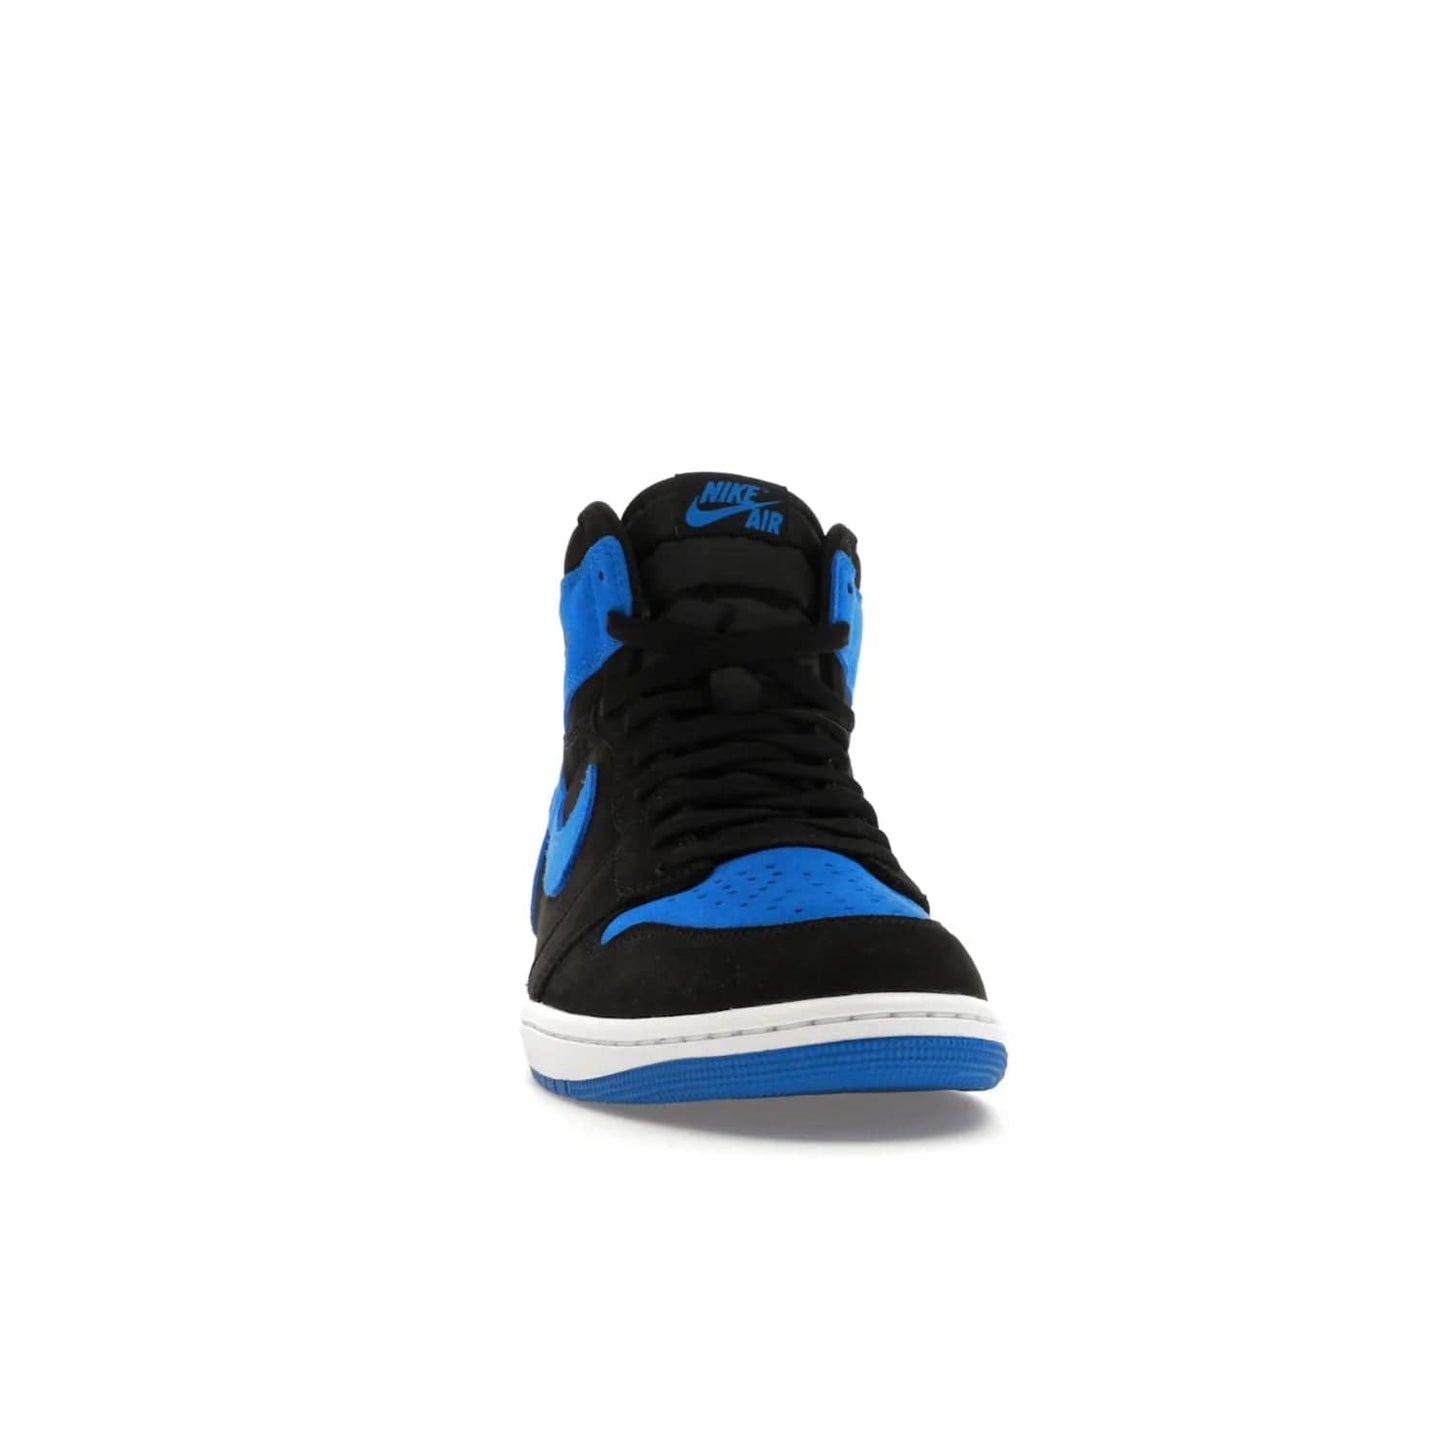 Jordan 1 Retro High OG Royal Reimagined - Image 9 - Only at www.BallersClubKickz.com - ####
Old meets the new: Jordan 1 Retro High OG 'Royal Reimagined' is a bold statement of evolution with its royal blue and black suede material makeup. Swoosh overlays, Wings logos, padded ankle collars and Nike Air tags maintain the OG's legendary lineage. Get a pair on November 4th and be part of a fearless, unyielding story.